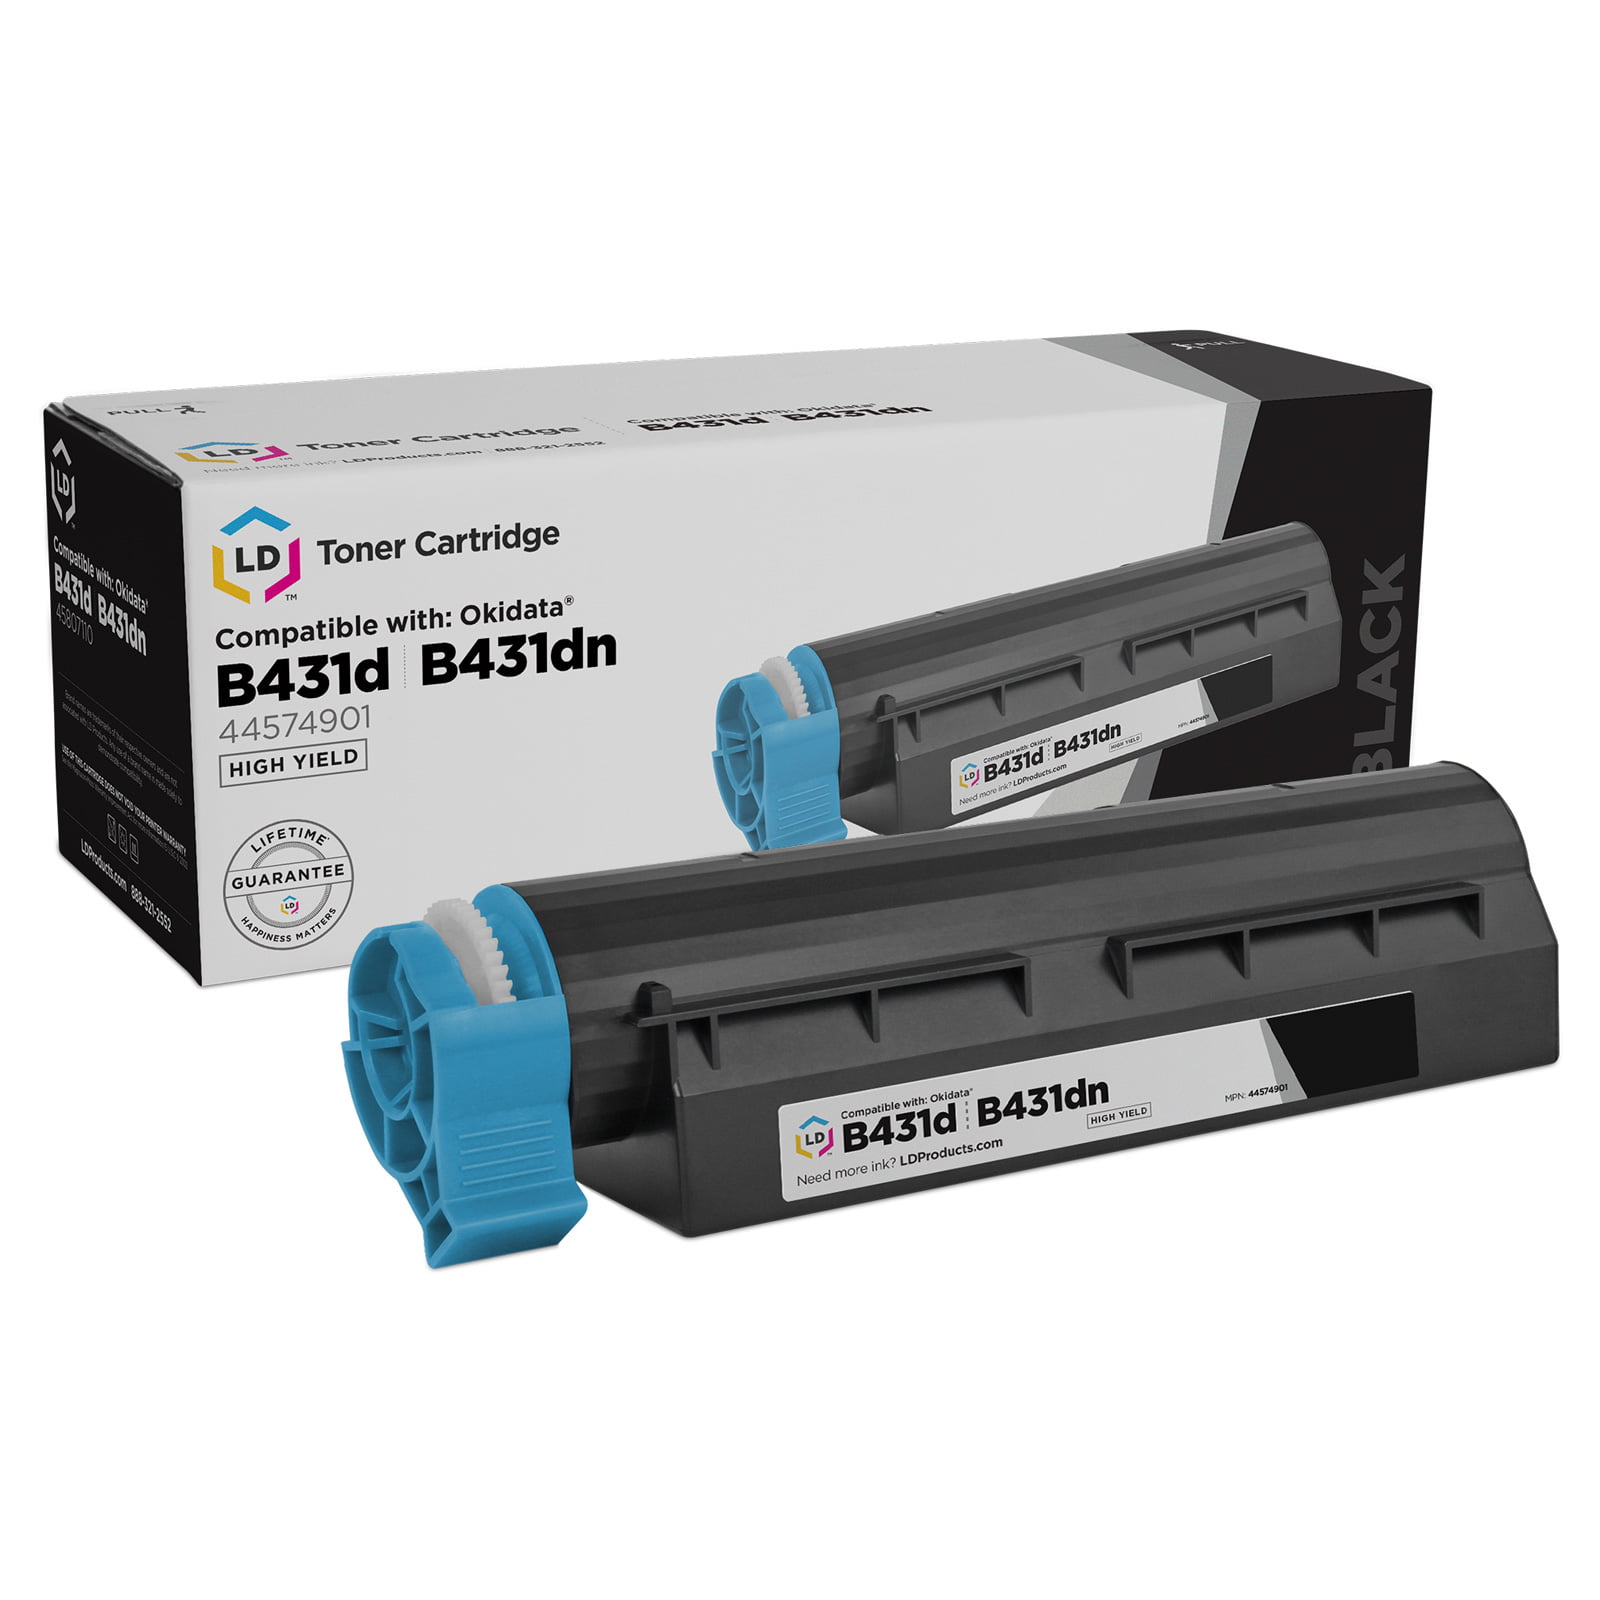 pala Eclipse solar Residuos LD Compatible Replacement for Okidata 44574901 High Yield Black Laser Toner  Cartridge for use in Okidata MB461 MFP, MB471, MB471W, OKI B431d, and B431dn  s - Walmart.com